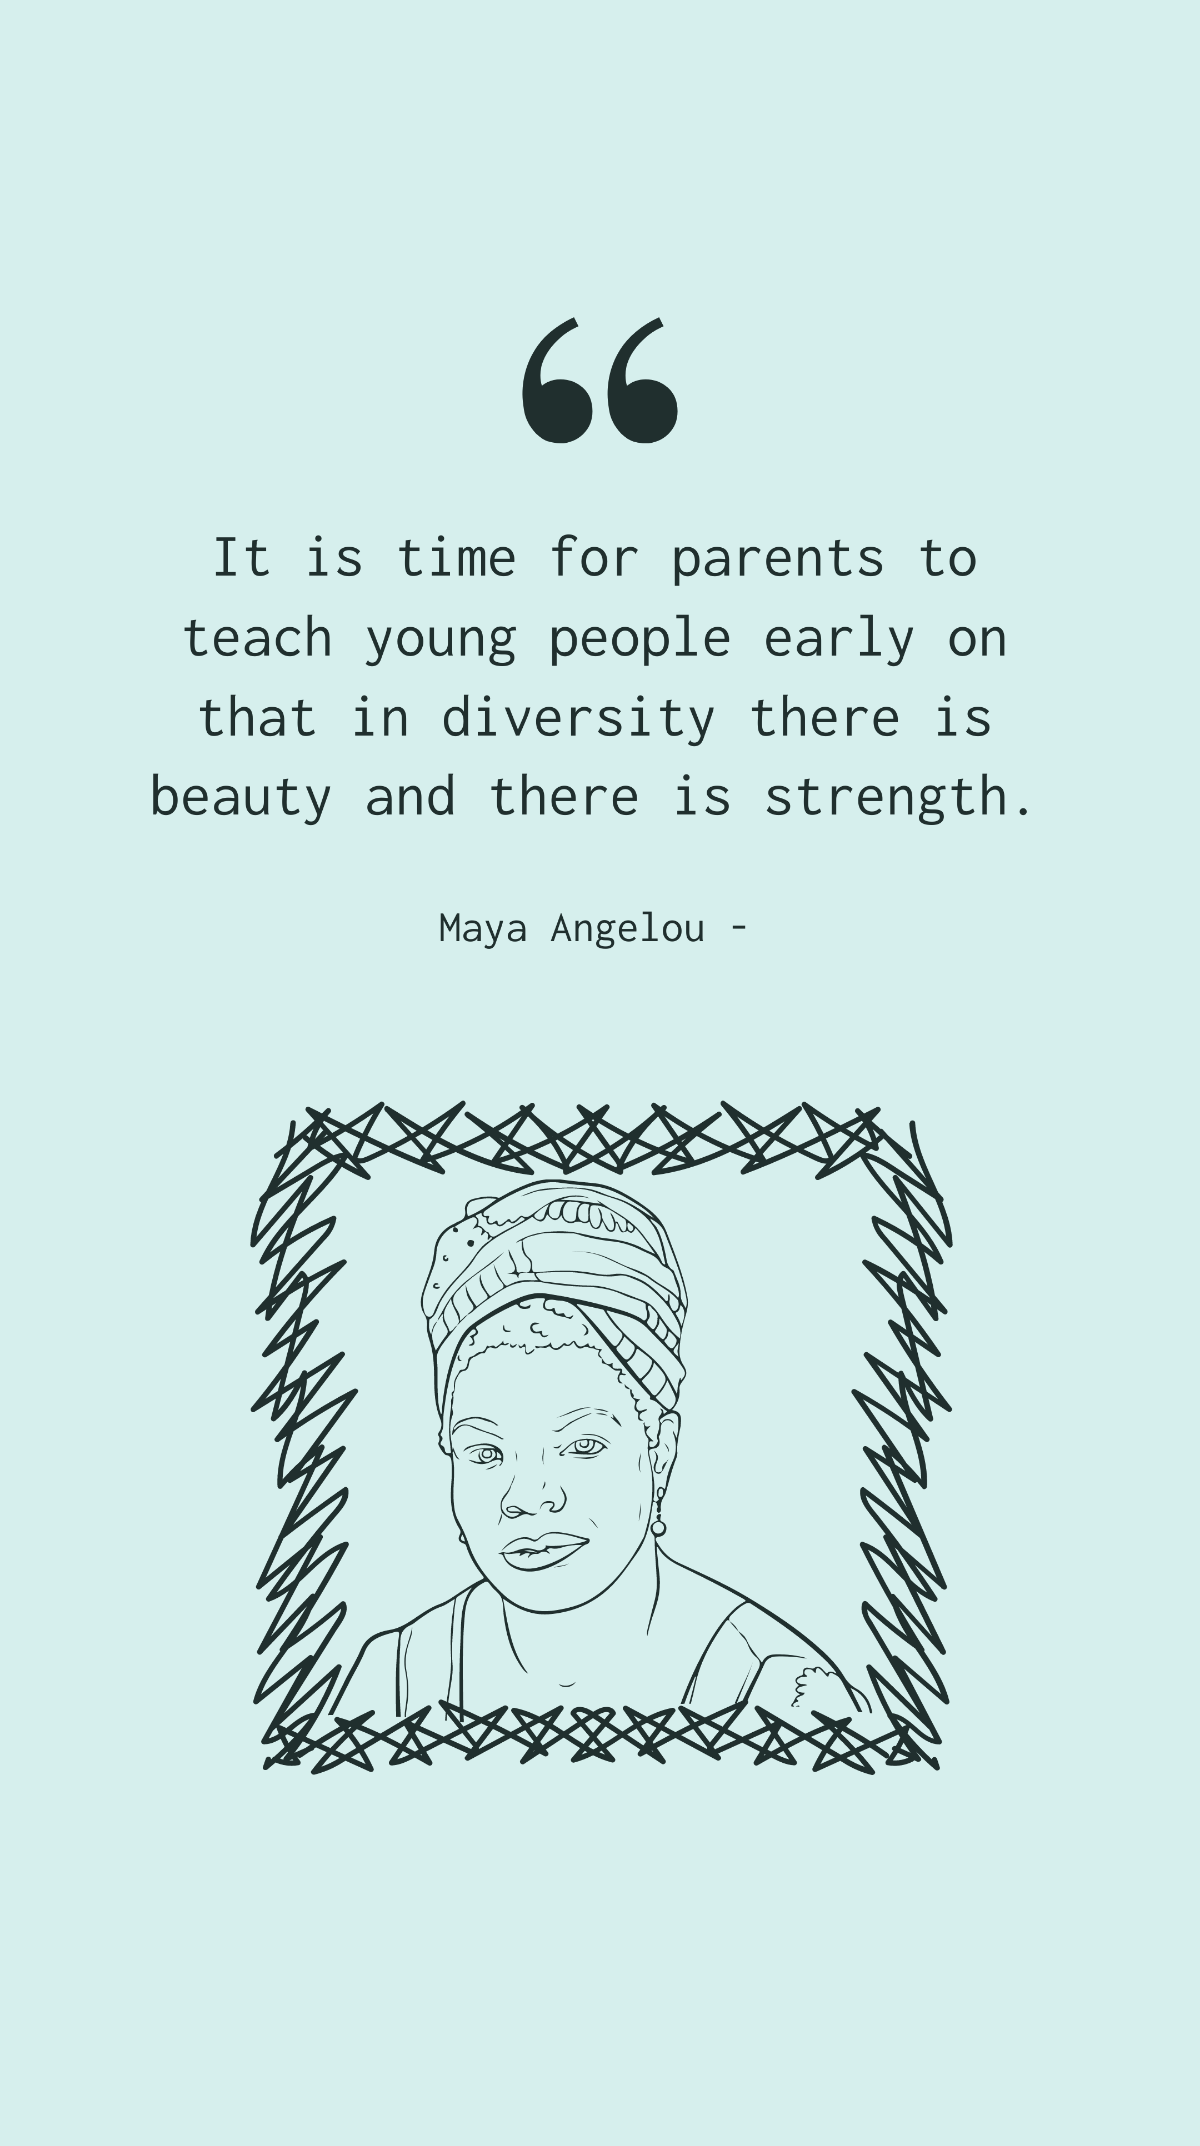 Maya Angelou - It is time for parents to teach young people early on that in diversity there is beauty and there is strength. Template